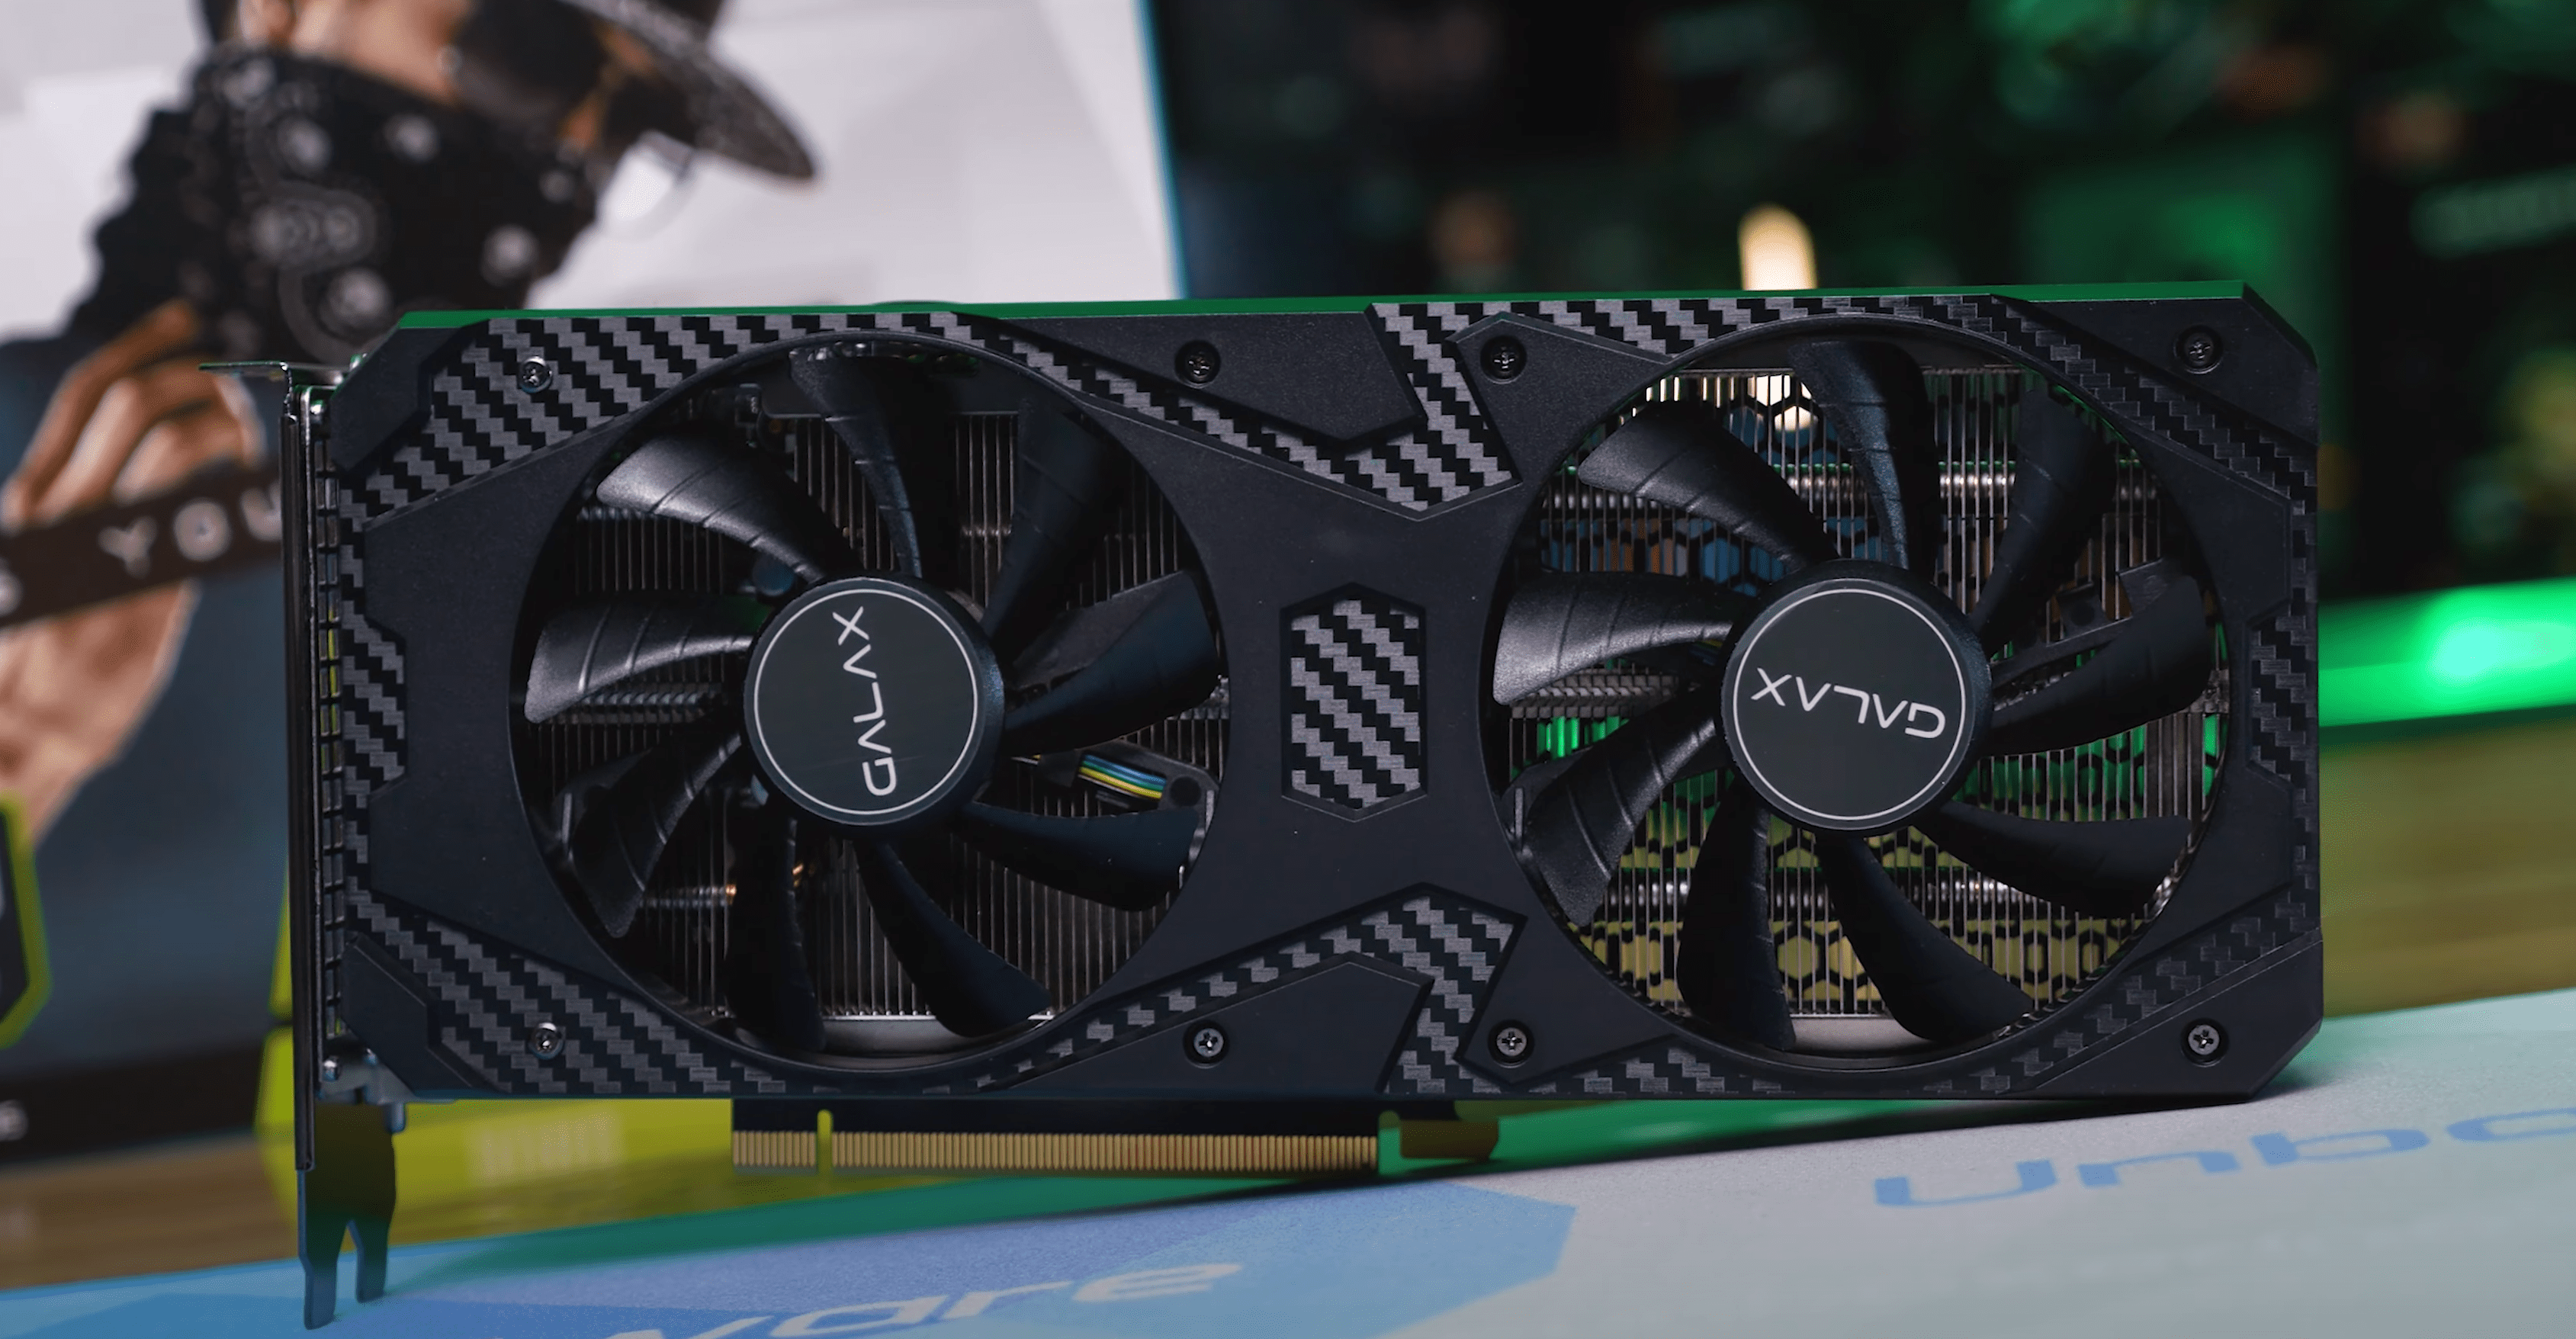 The new NVIDIA GeForce RTX 3060 with 8GB GDDR6X memory tested